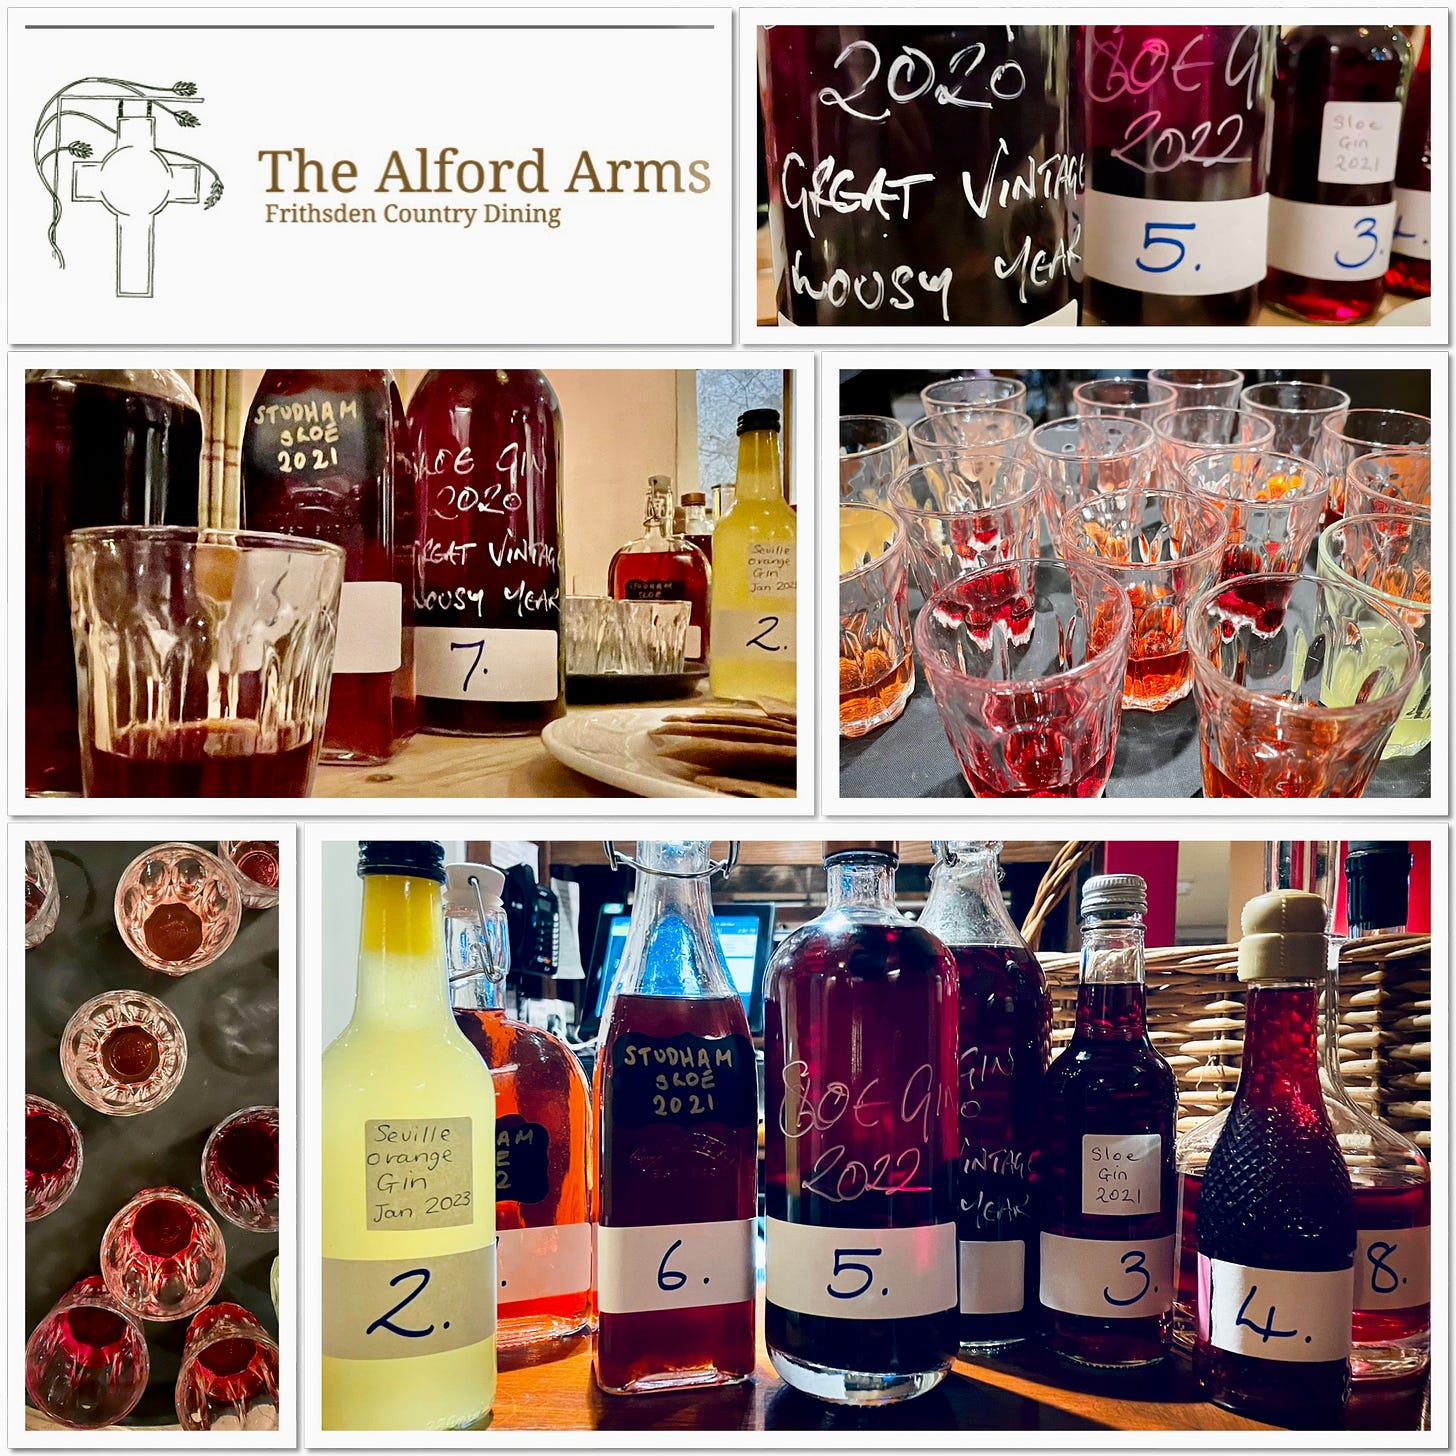 The bottles of sloe gin to be tasted and judged at The Alford Arms